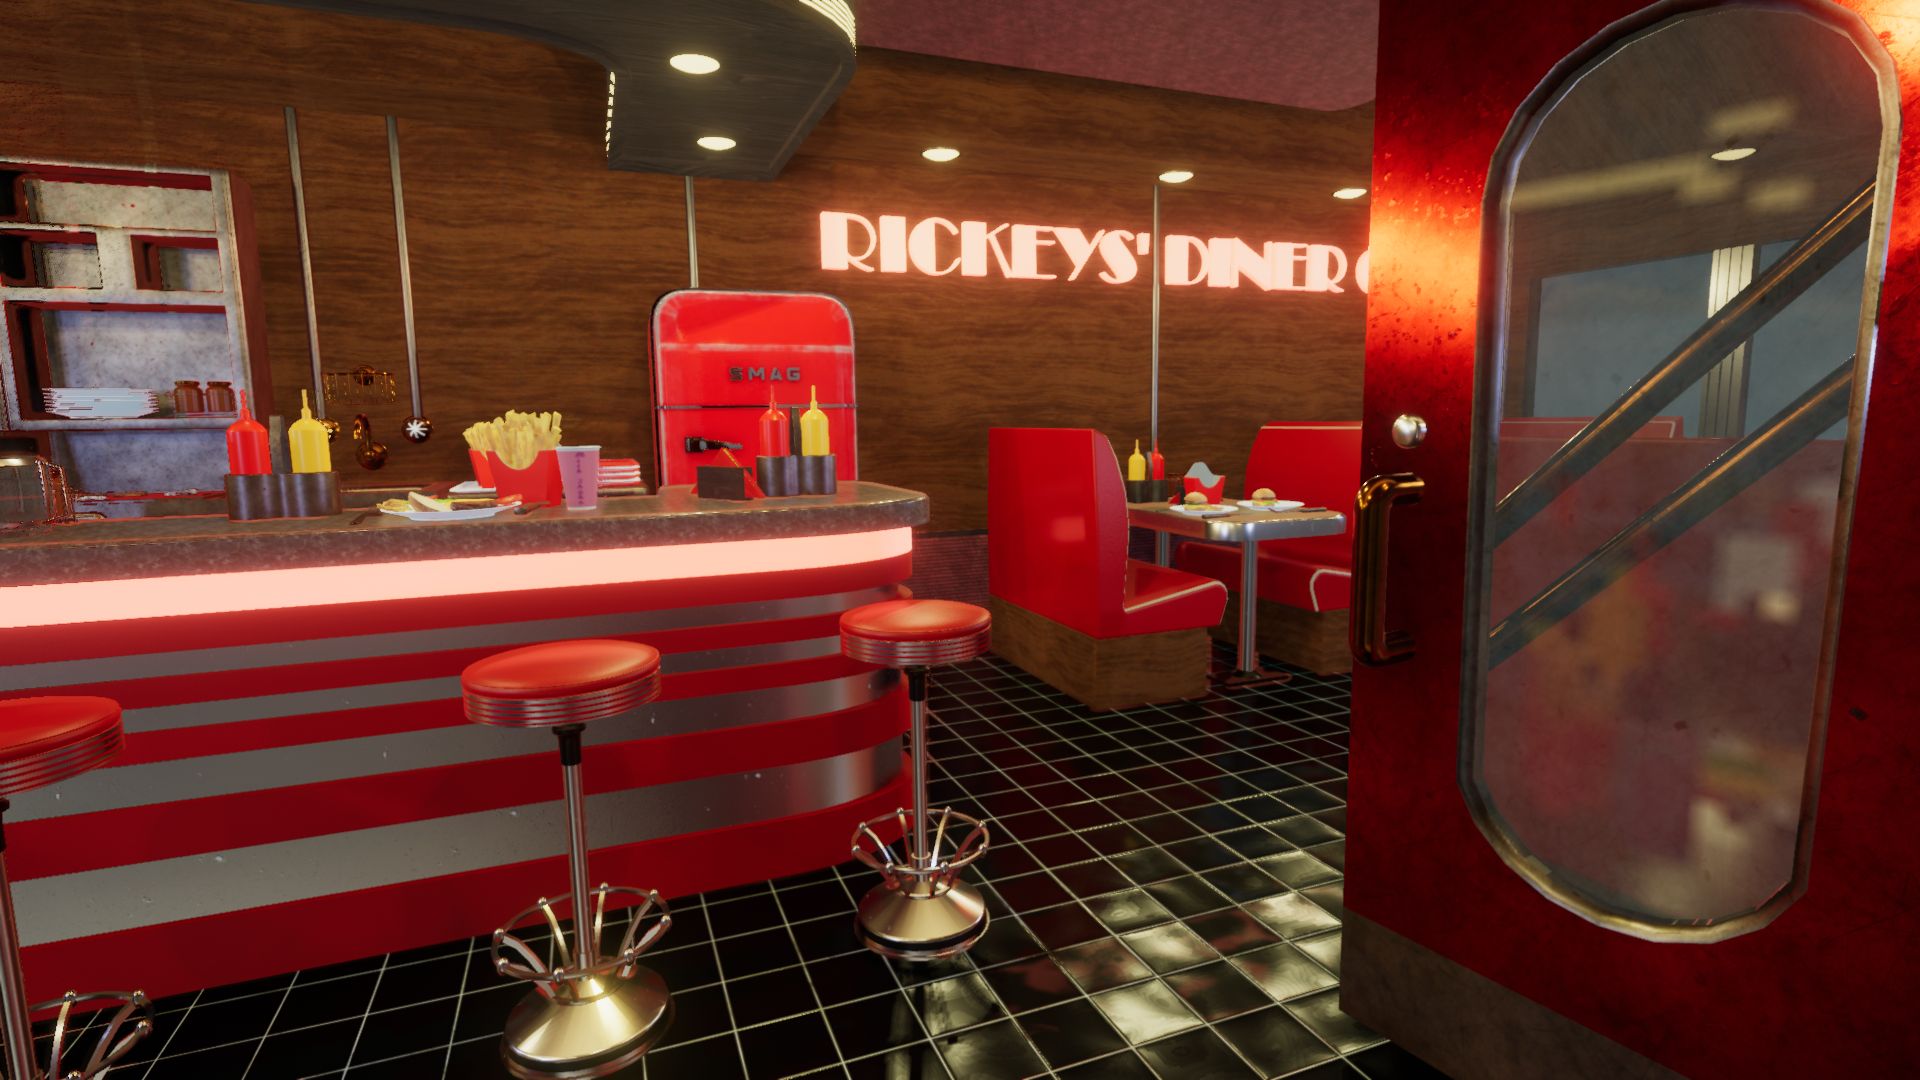 An image showing Rickey's Diner Car asset pack, created with Unity Engine.